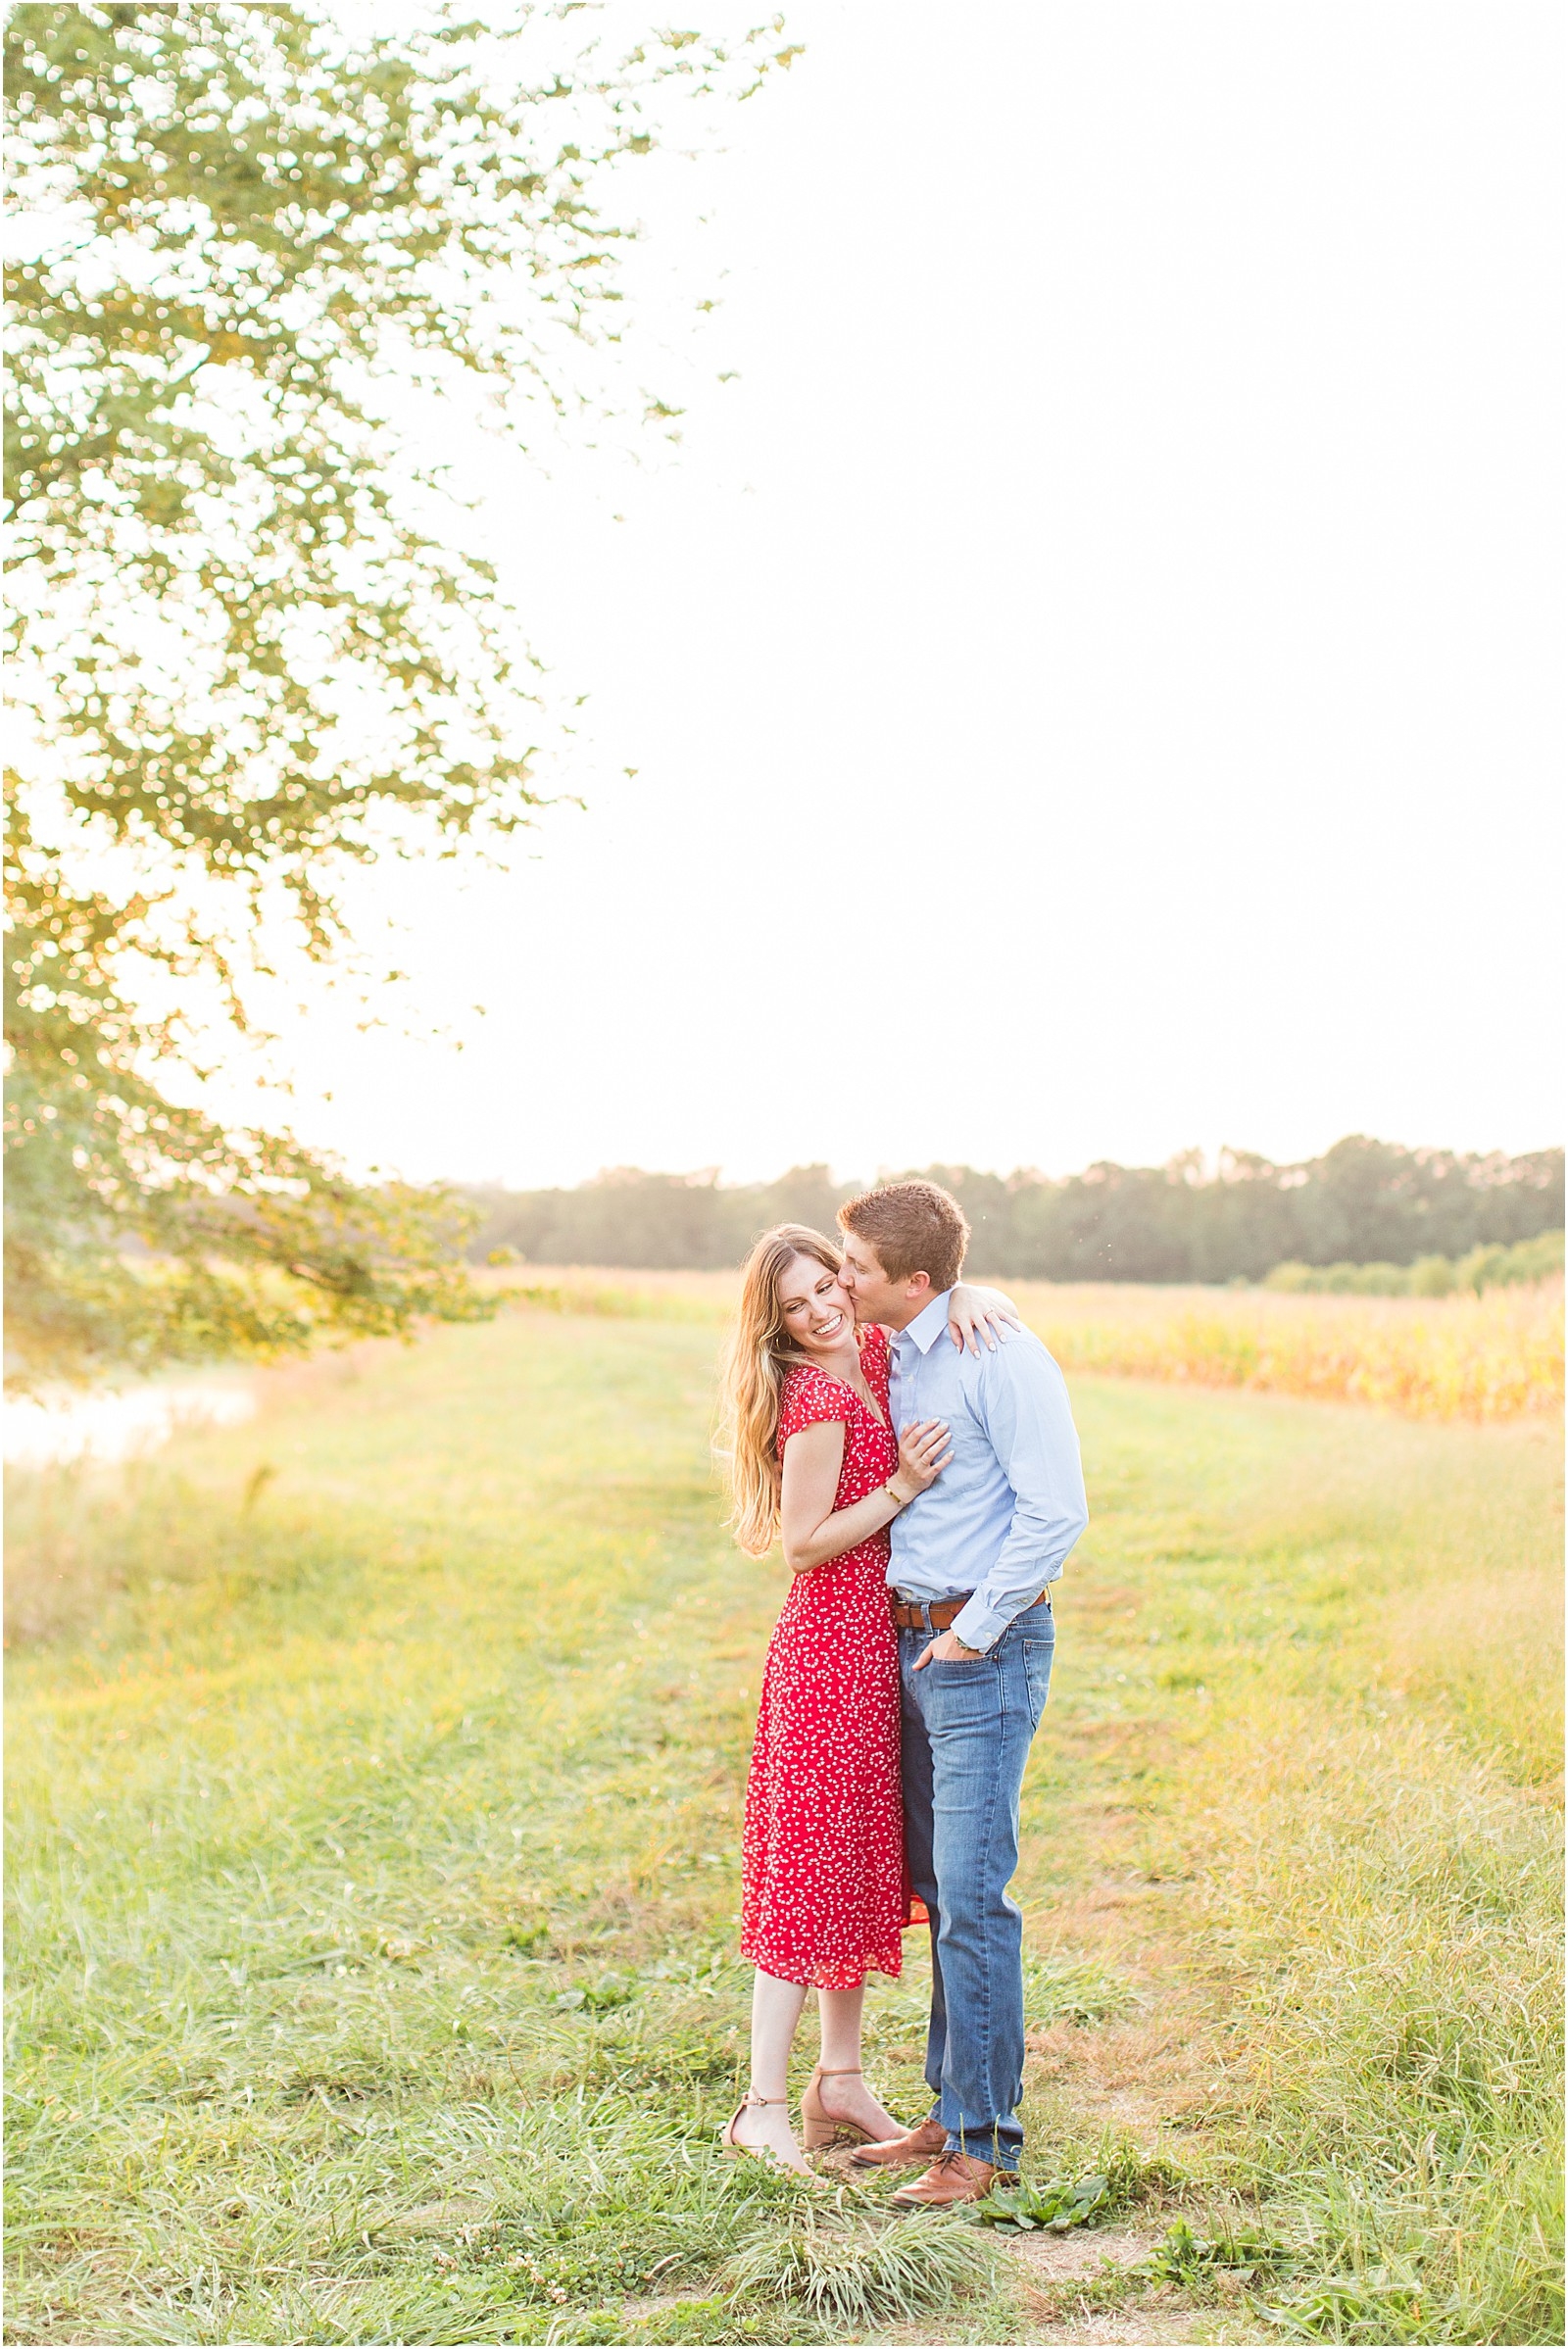 A Jasper Indiana Engagement Session | Tori and Kyle | Bret and Brandie Photography046.jpg